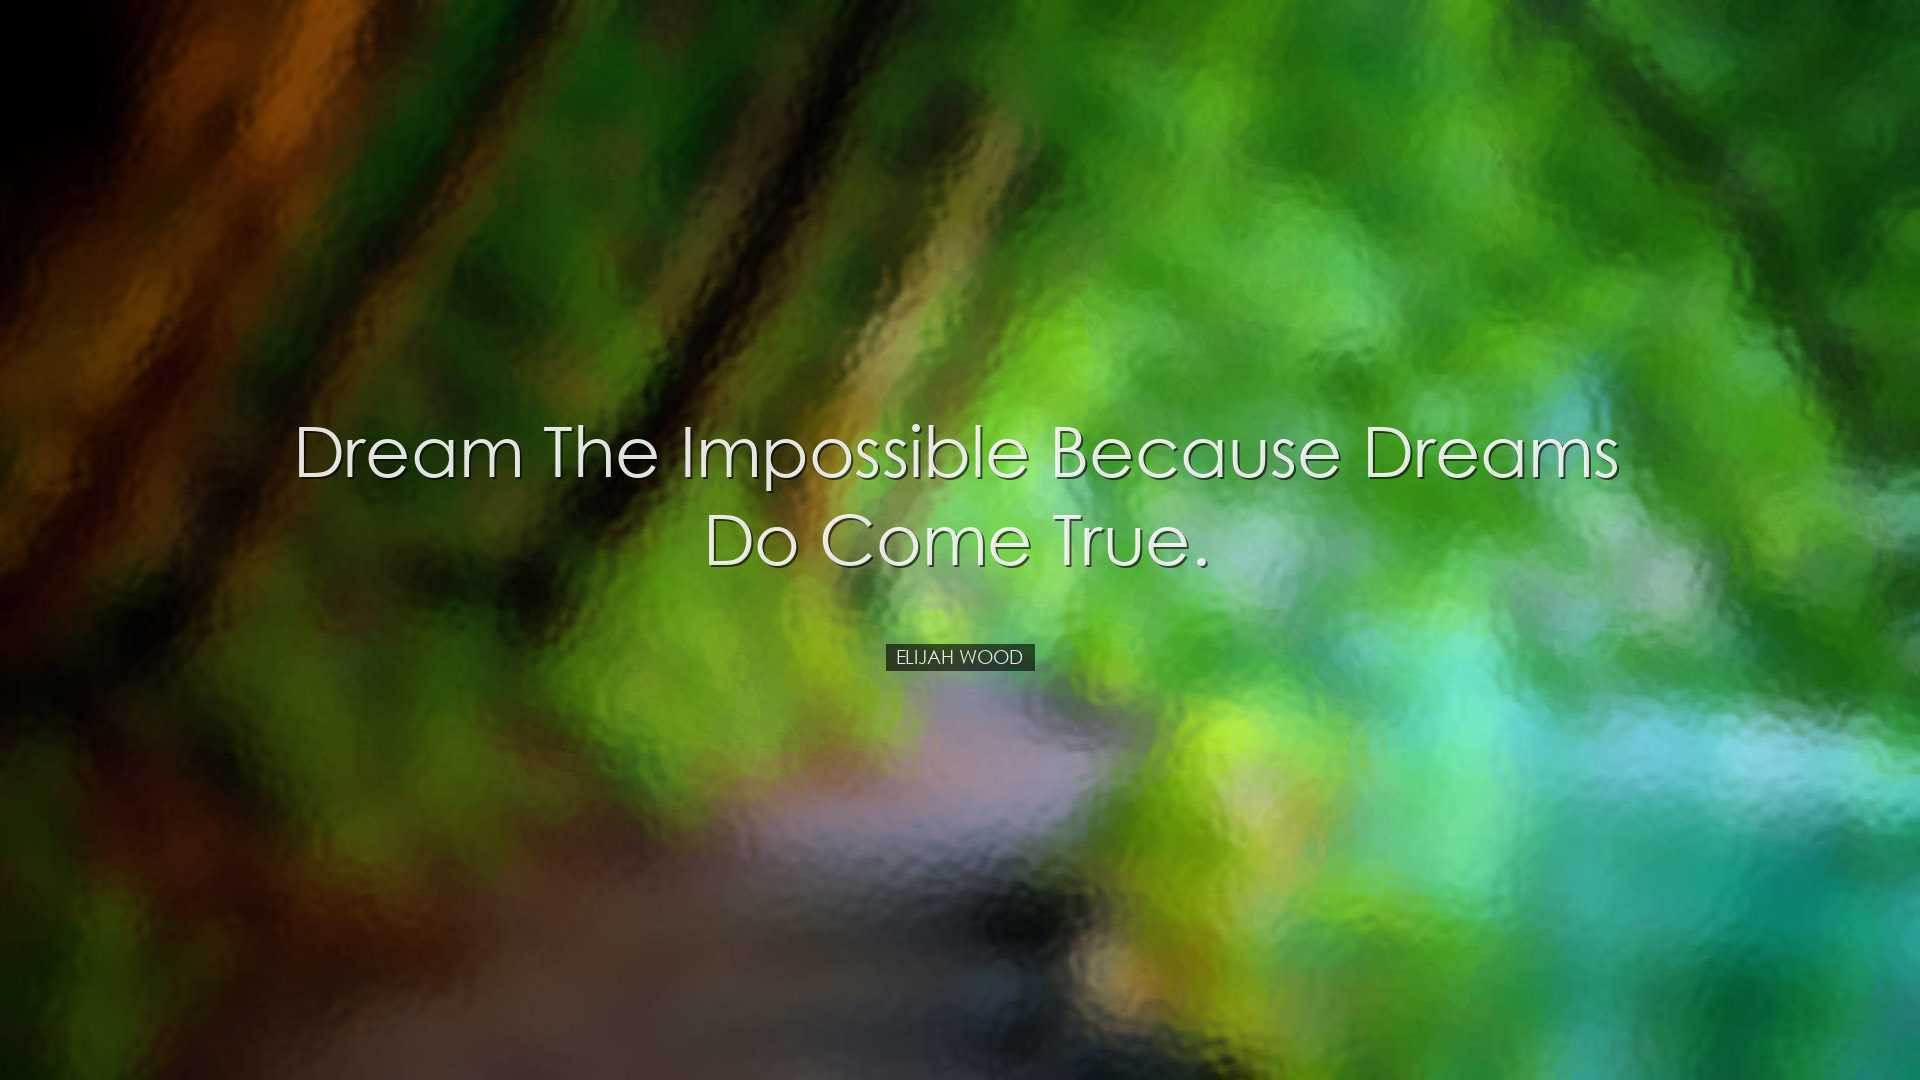 Dream the impossible because dreams do come true. - Elijah Wood